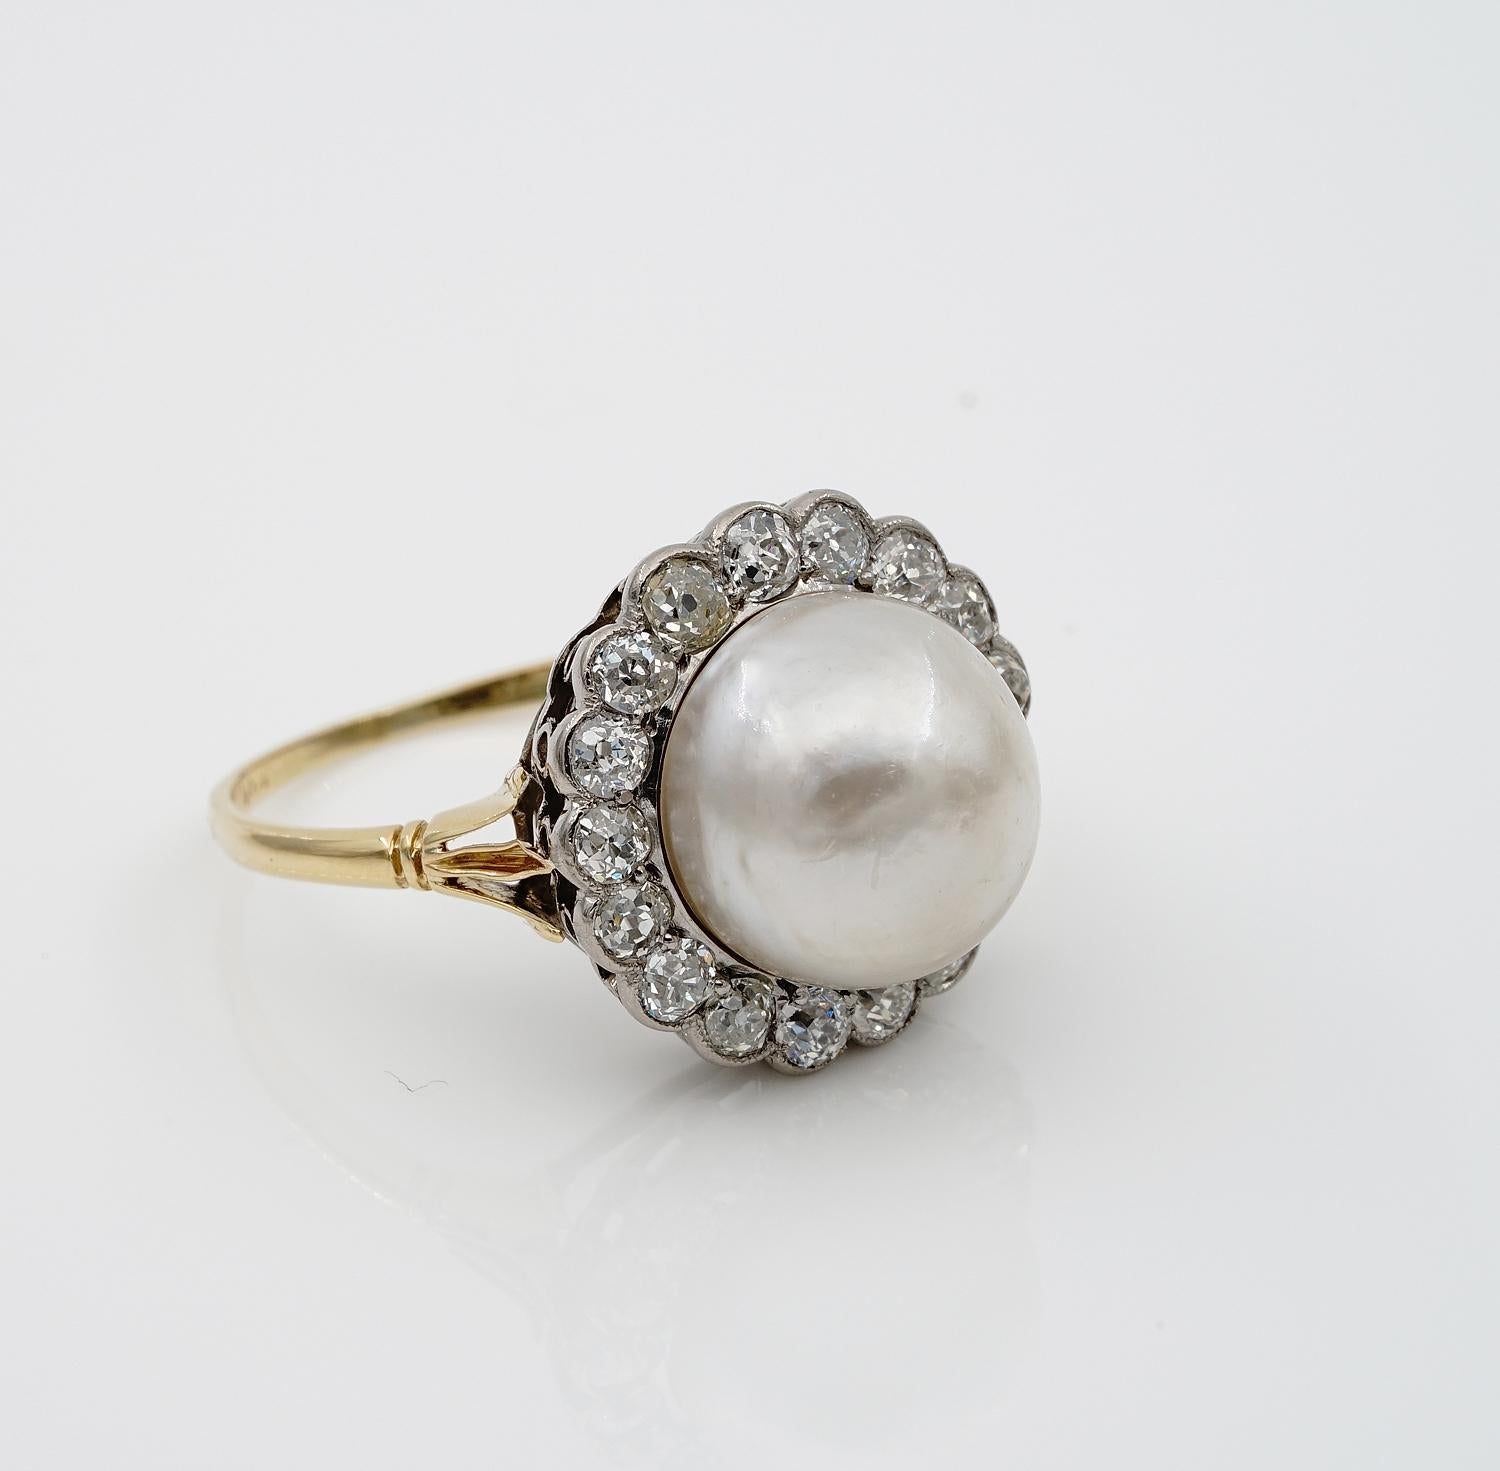 Old Mine Cut Edwardian 12 MM. Natural Split Pearl 1.60 Ct Diamond Engagement Ring For Sale